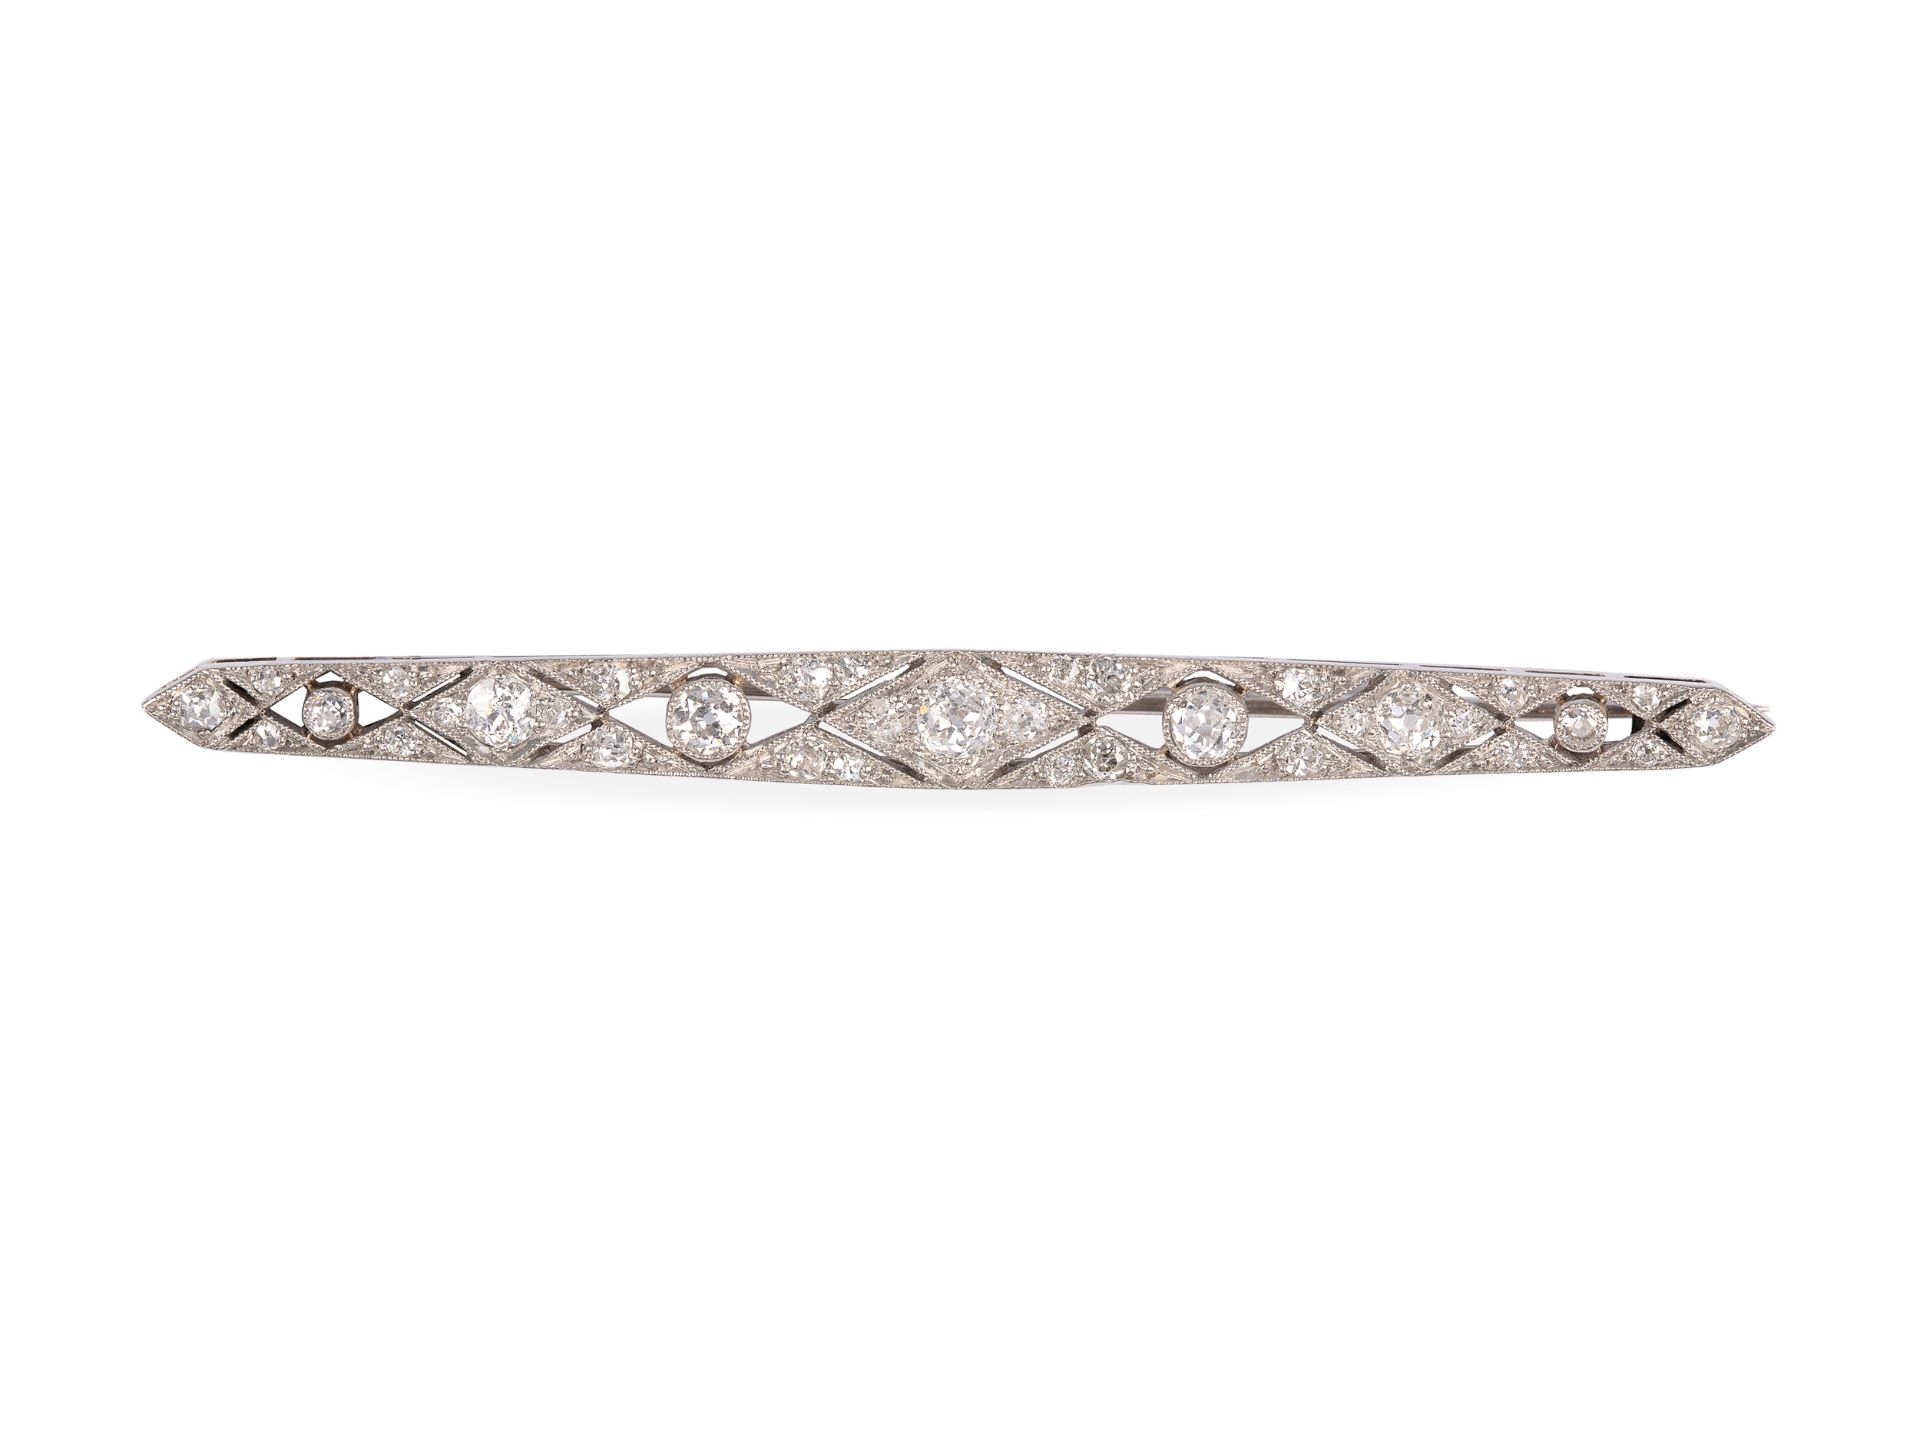 Rod brooch, White gold (not hallmarked), Set with 7 old-cut brilliant-cut diamonds